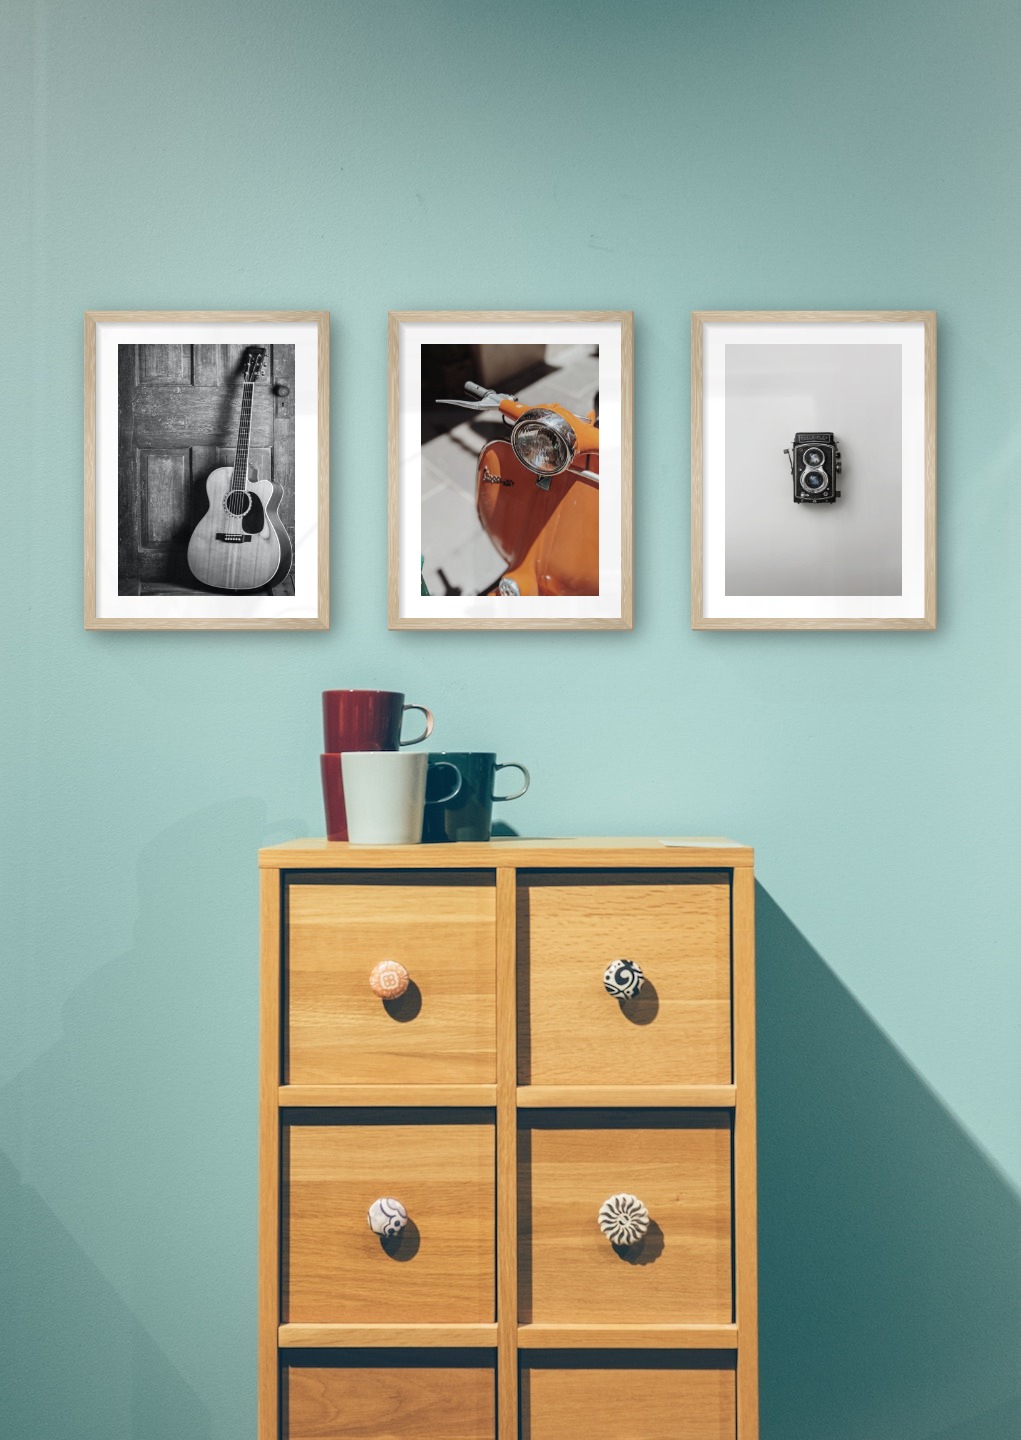 Gallery wall with picture frames in wood in sizes 30x40 with prints "Guitar", "Orange vespa" and "Camera"